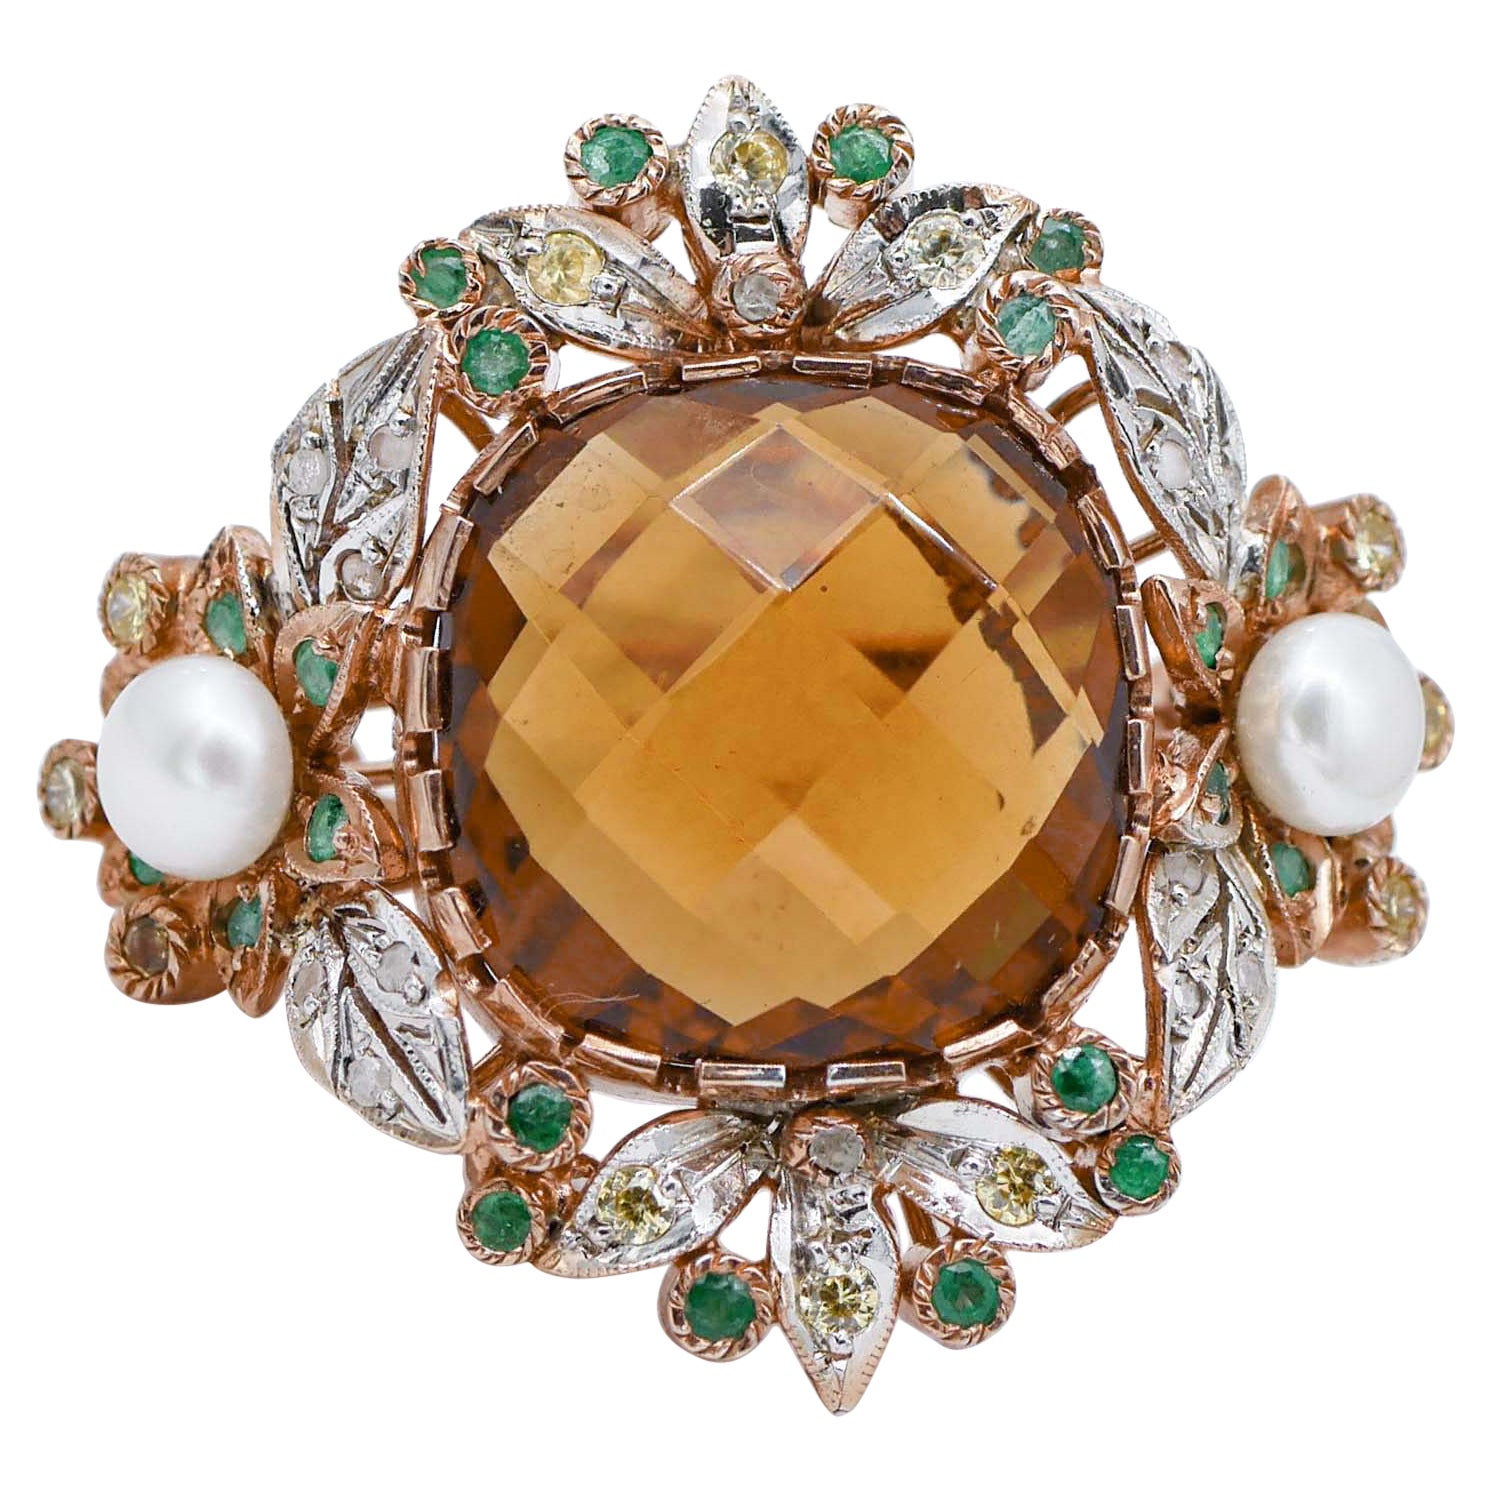 Topaz, Emeralds, Diamonds, Pearls, Rose Gold and Silver Retrò Ring For Sale